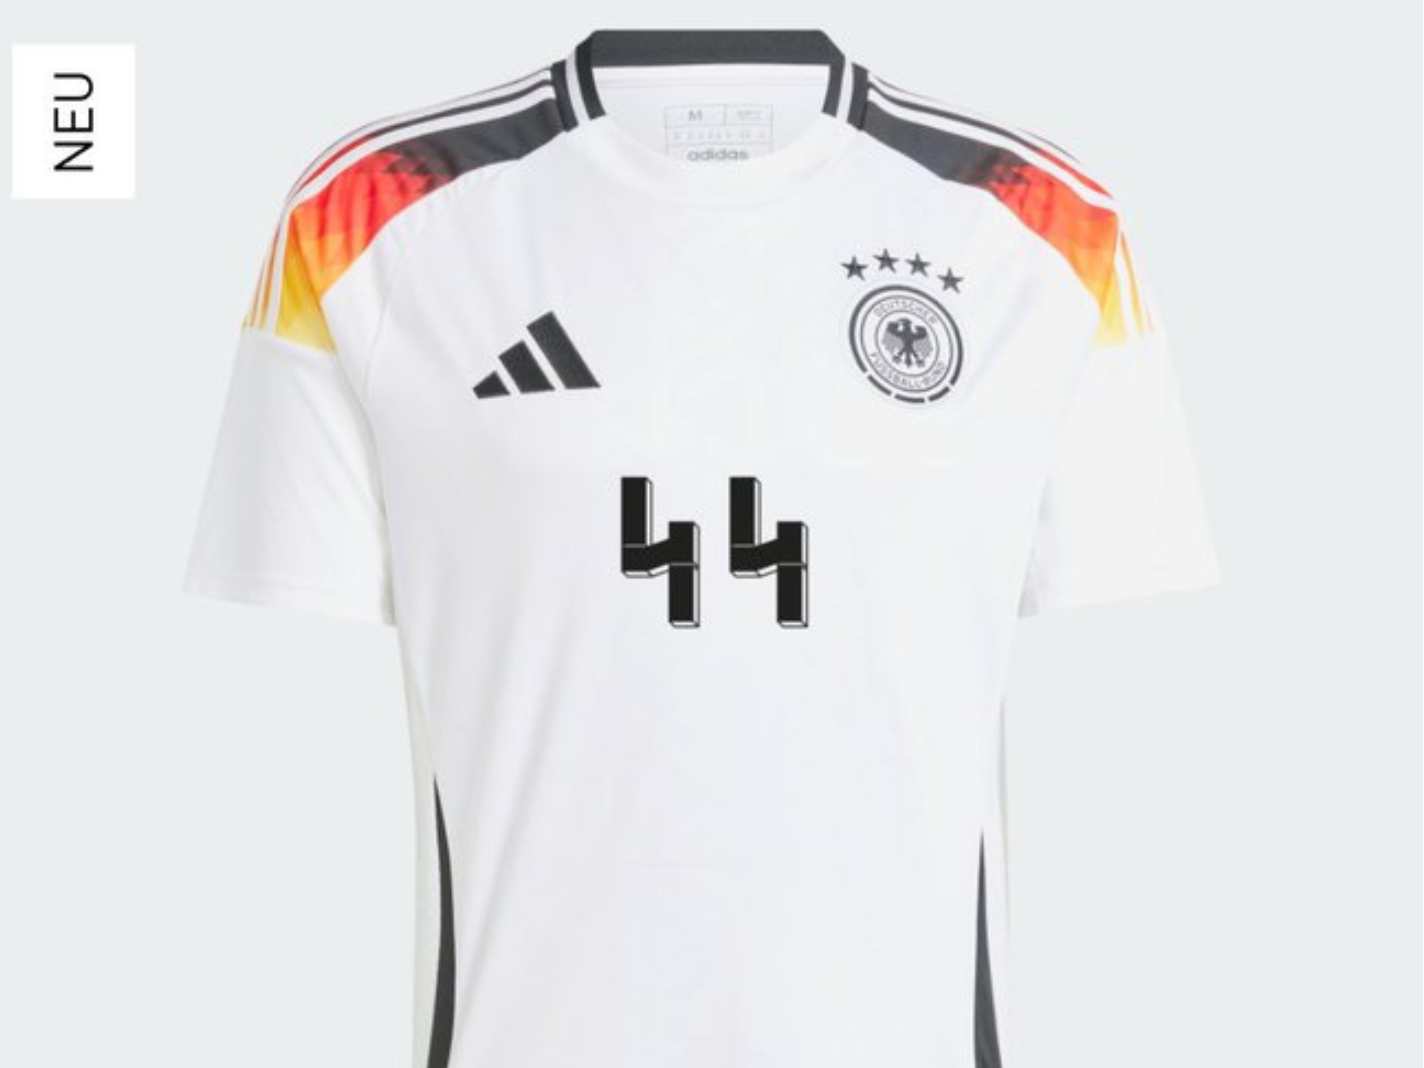 Why Choosing ’44’ on New Germany Kits for Euro 2024 is Causing a Stir